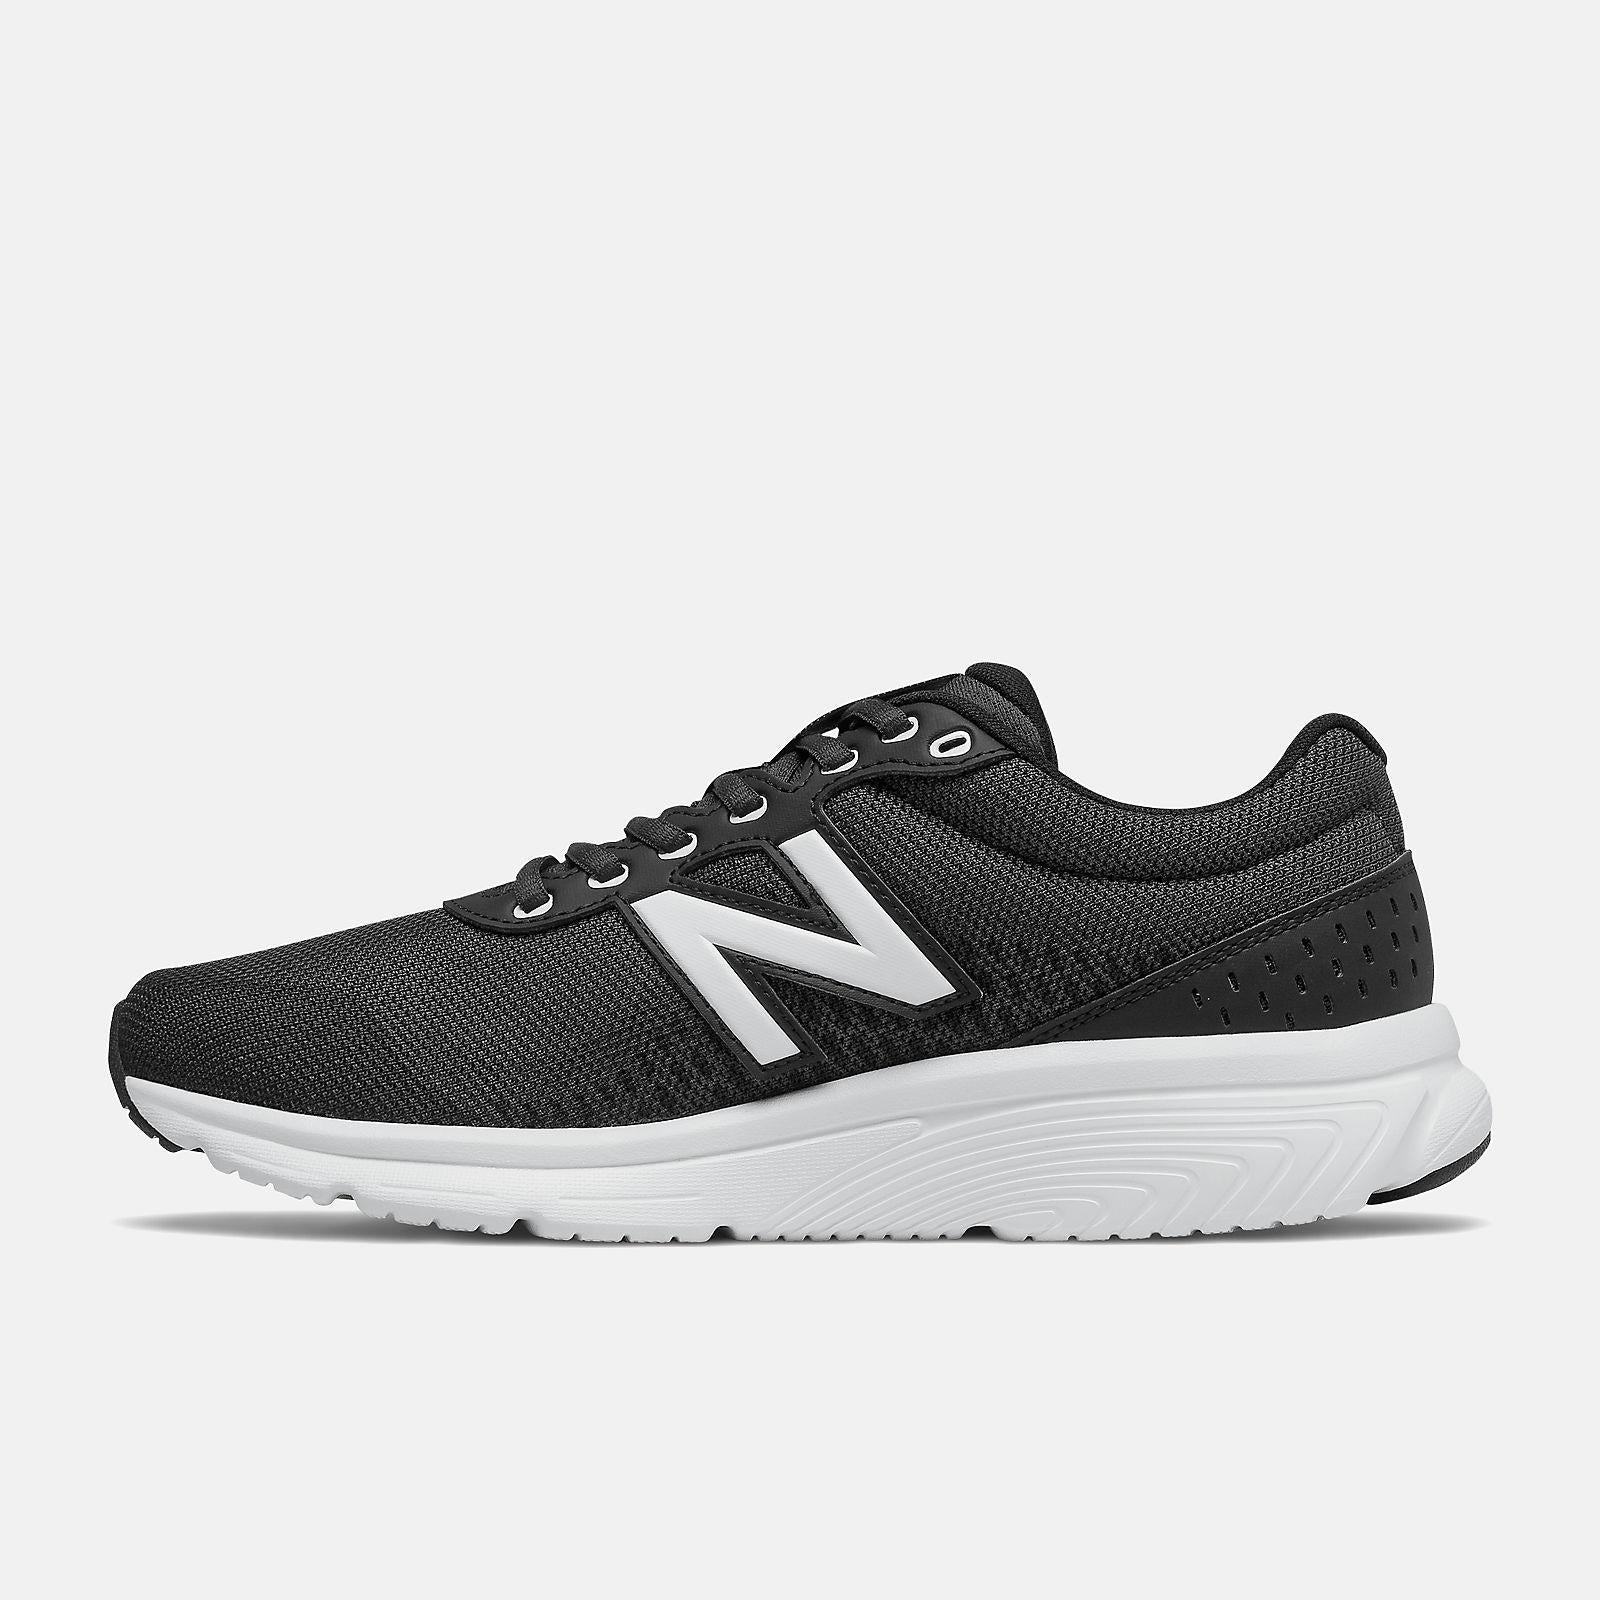 Mens Wide Fit New Balance M411LB2 Trainers | New Balance | Wide Fit Shoes